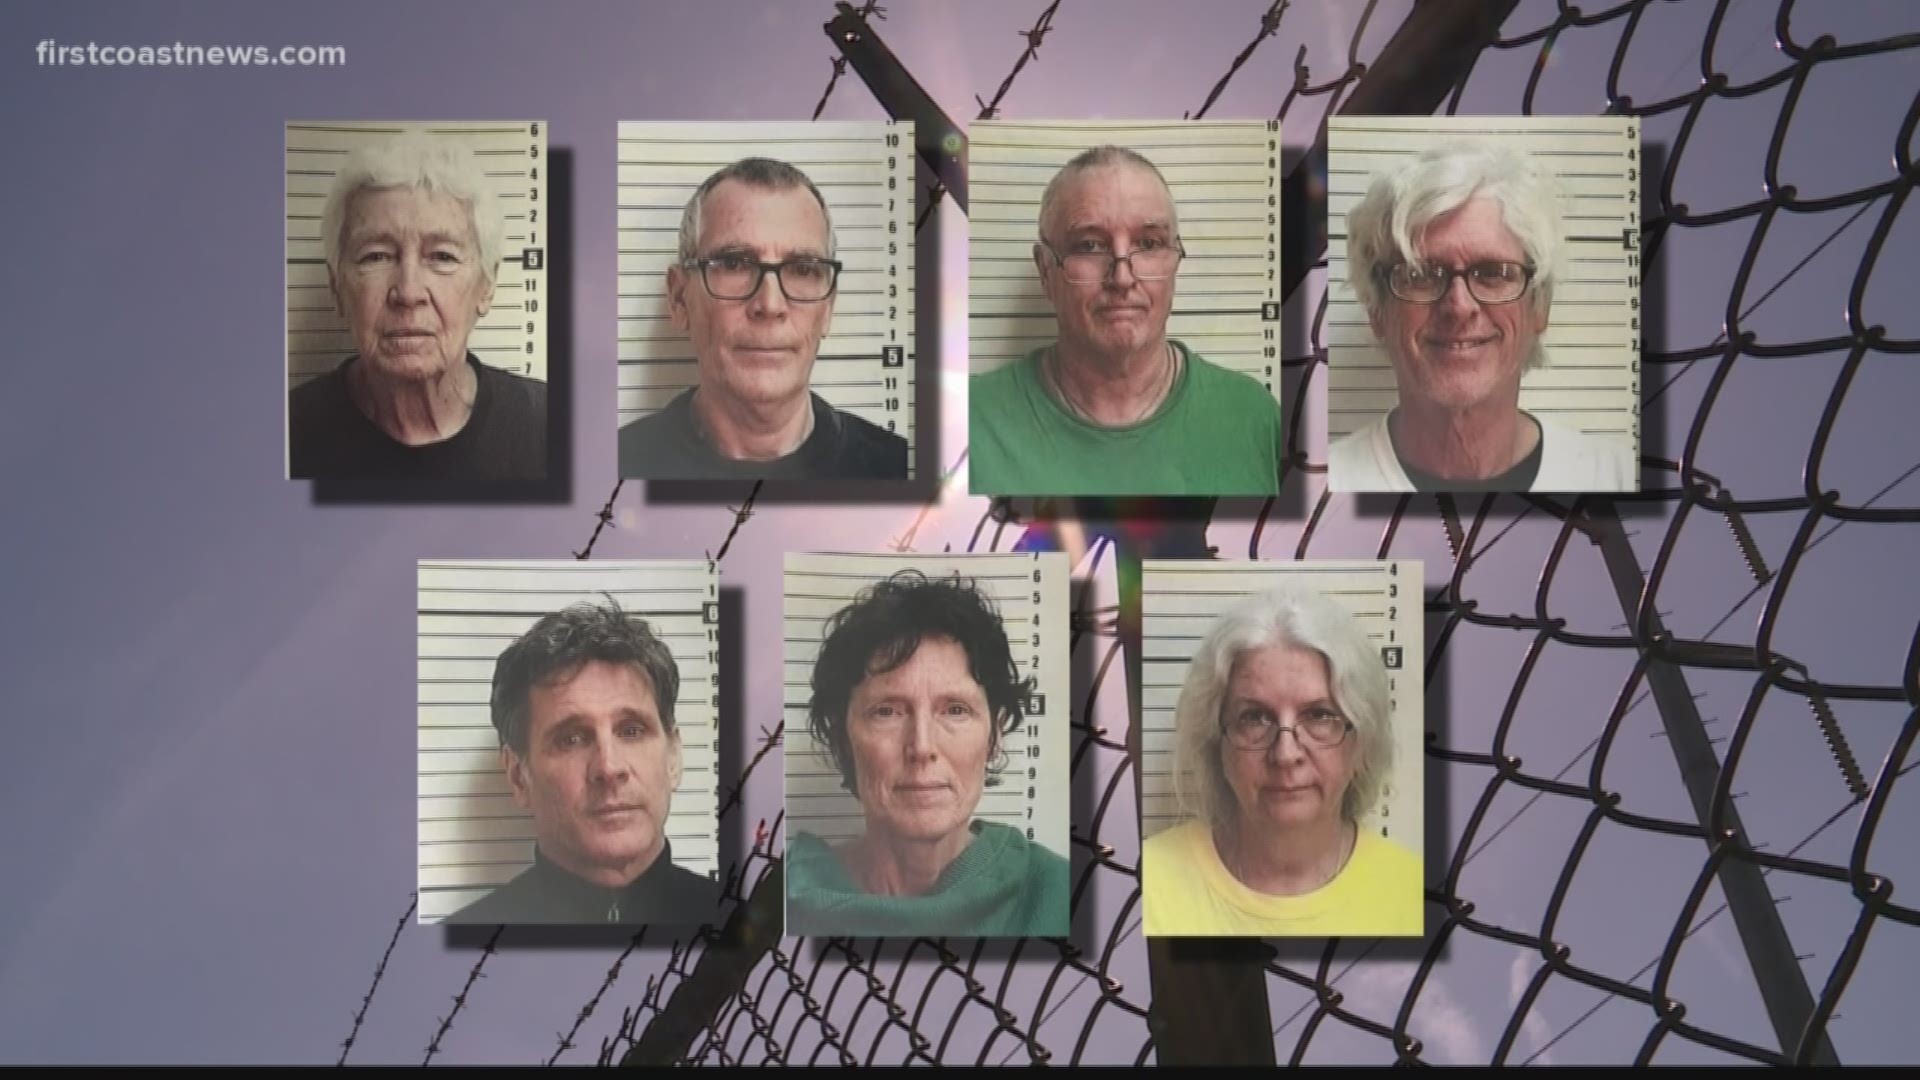 Seven men and women who call themselves the Kings Bay Plowshares 7 have been found guilty of destruction and trespassing in a federal courtroom in Brunswick.